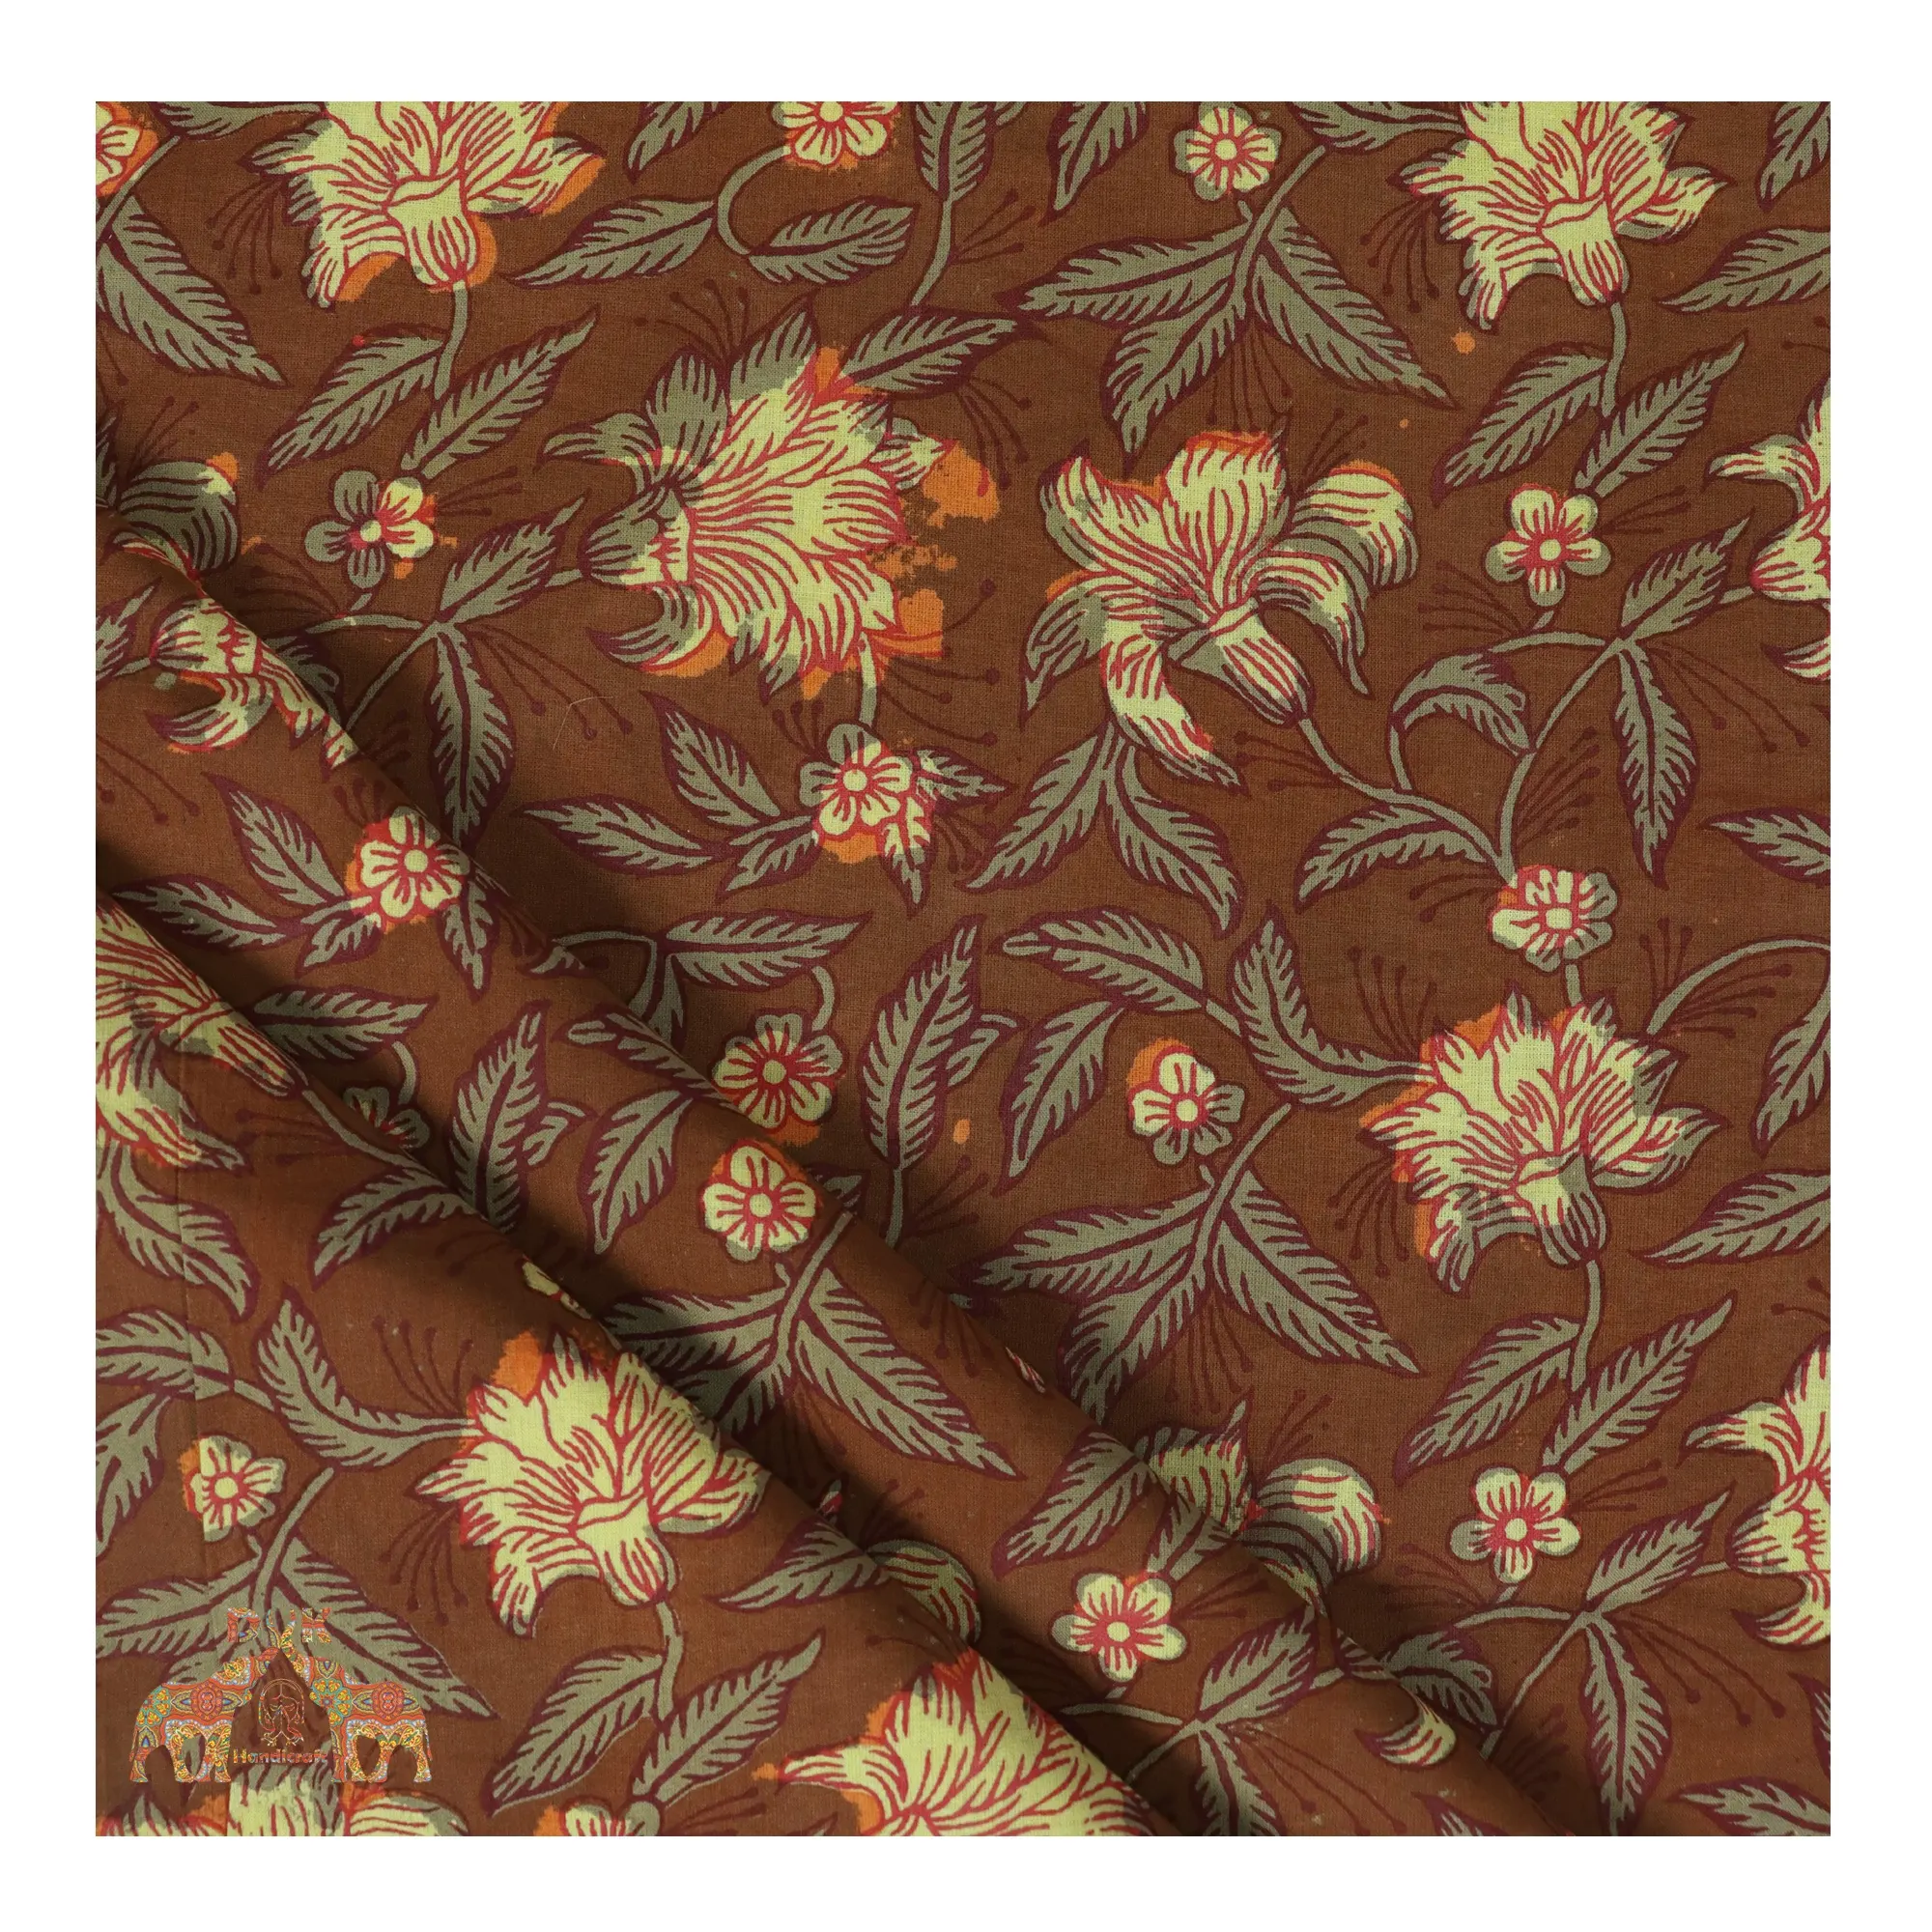 Printed fabric hand block print cotton fabric wholesale Indian cloth textile fabric for garments